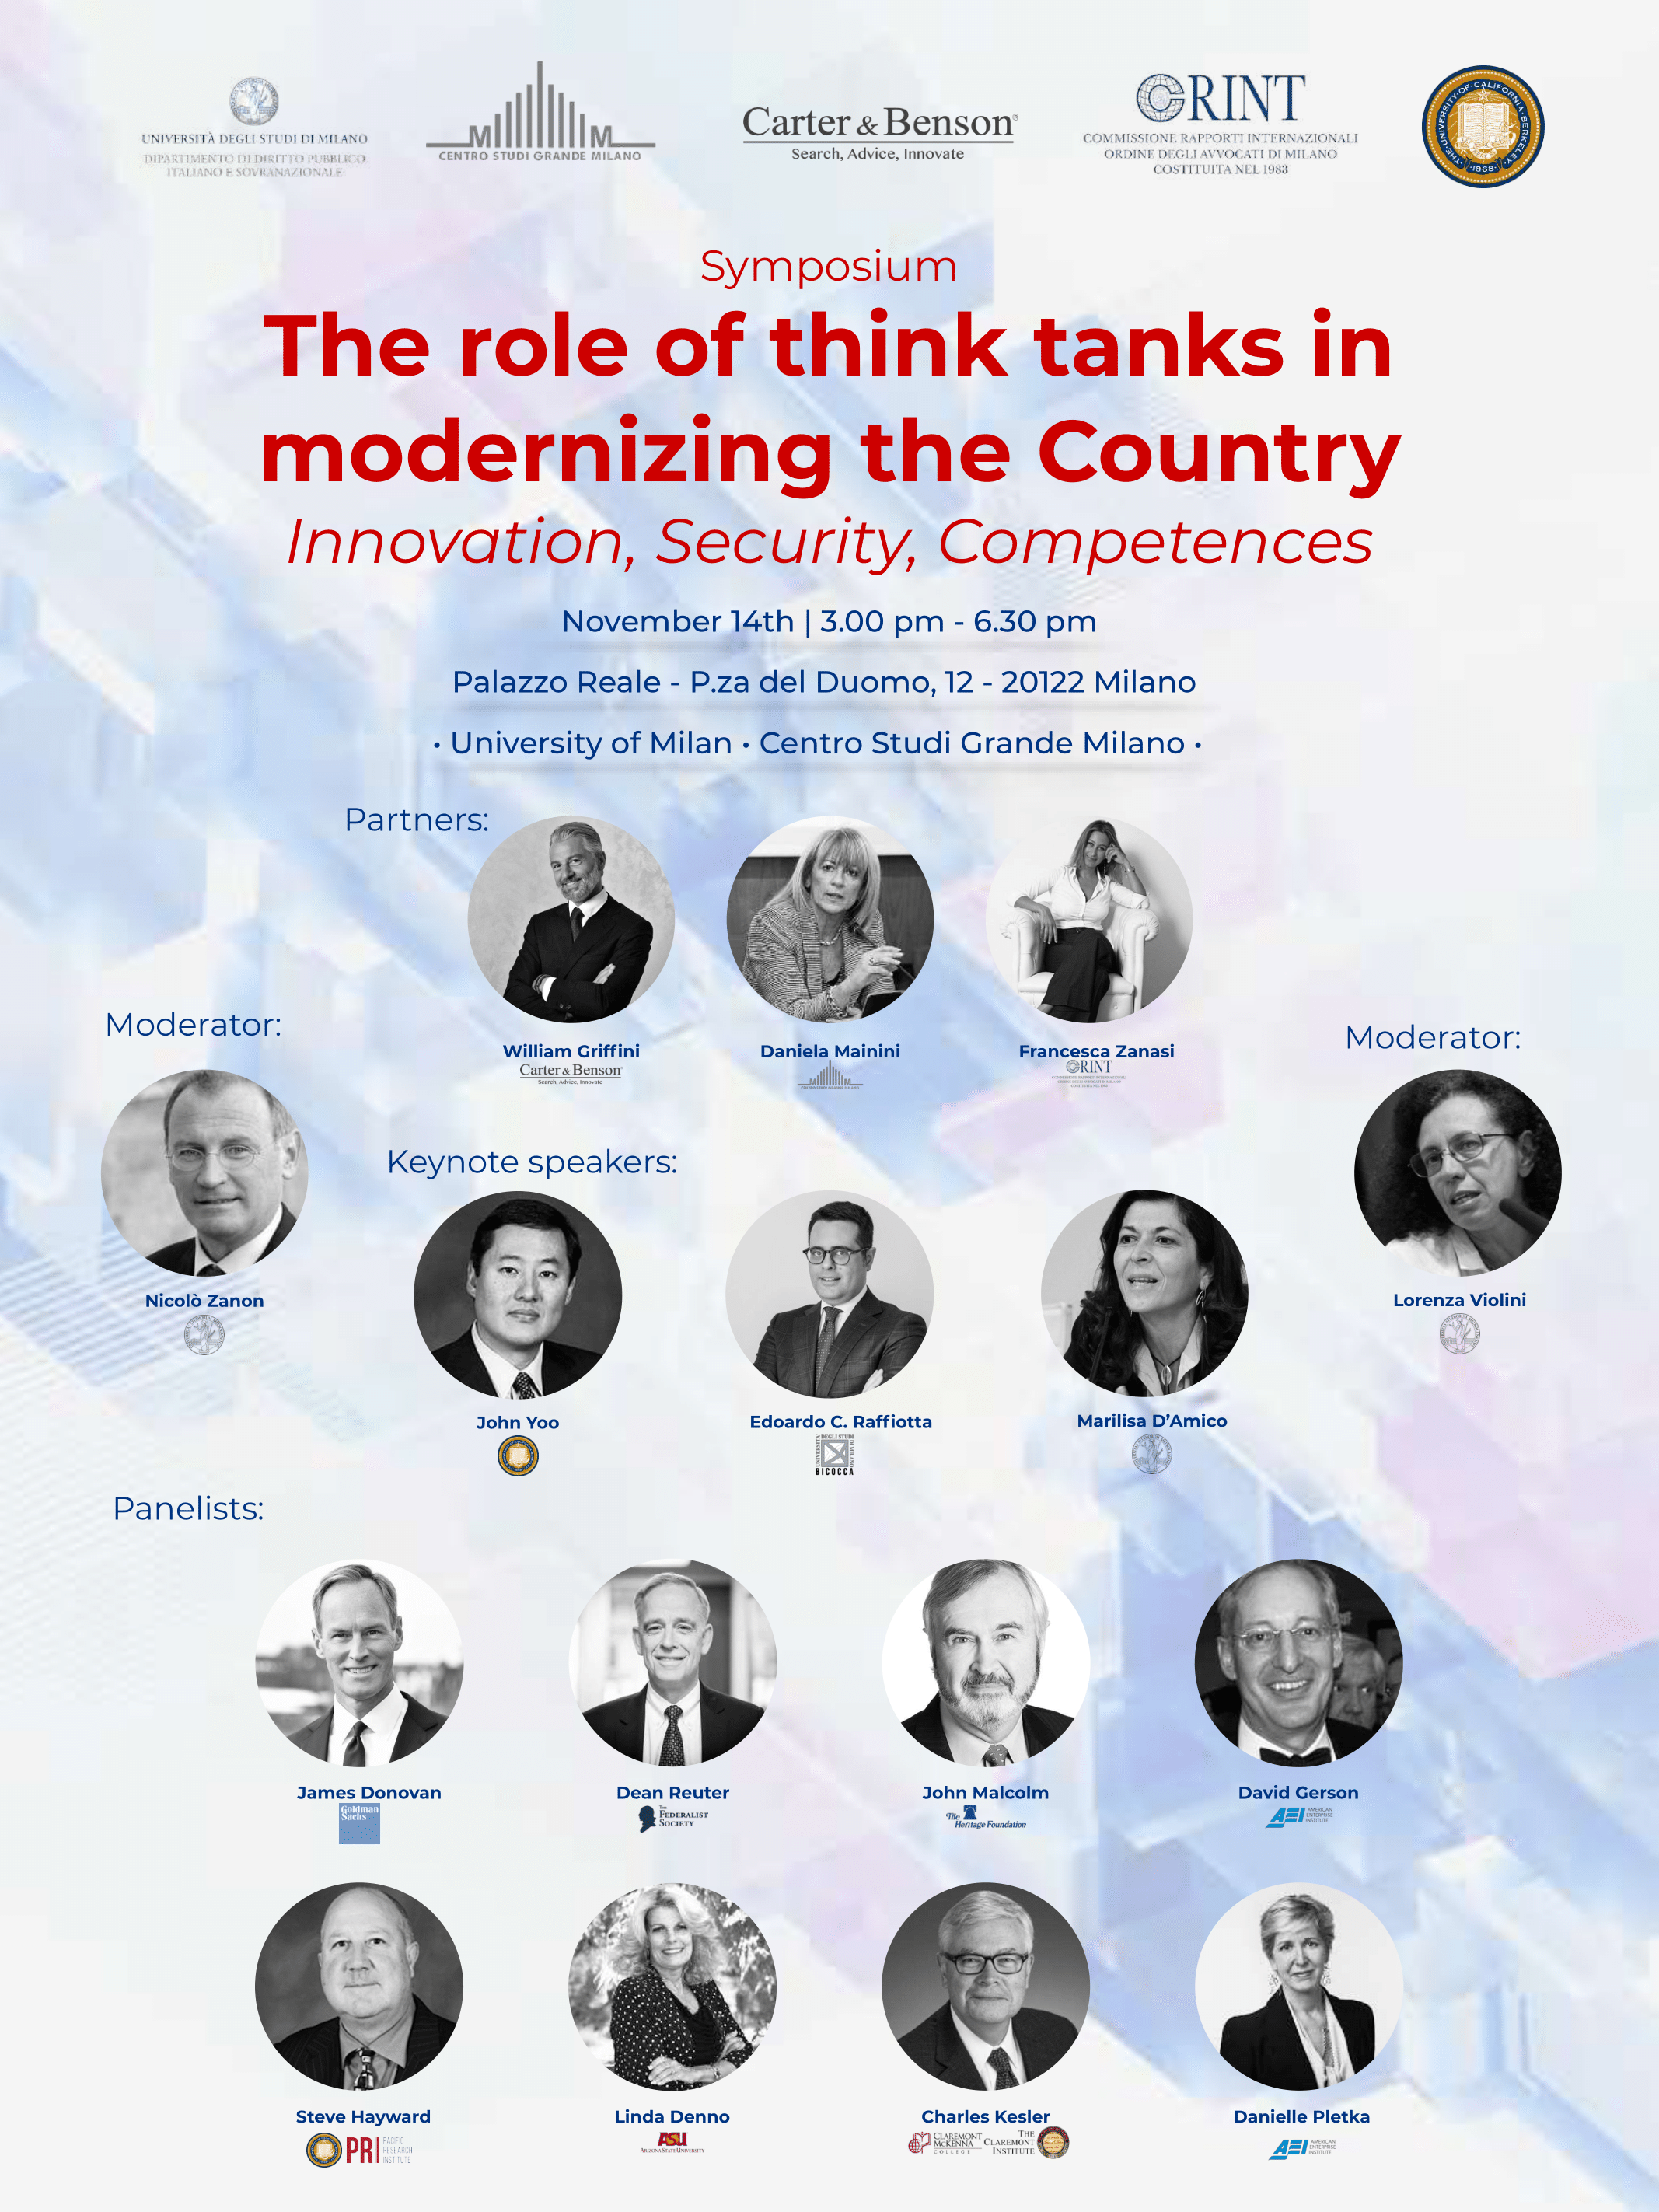 The role of think tanks in modernizing the Country